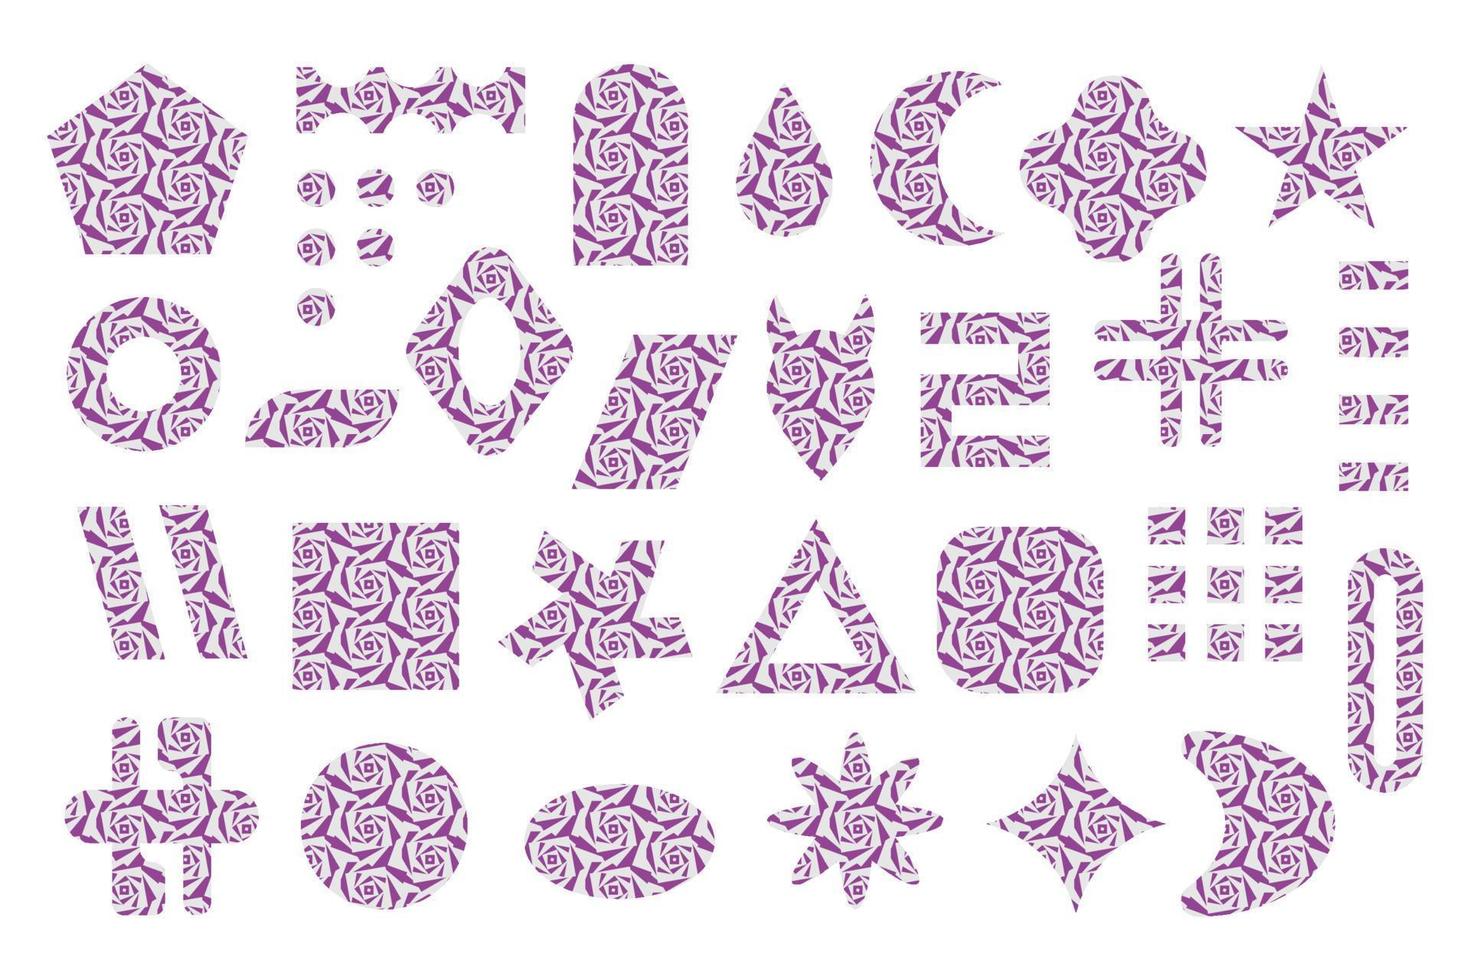 Set of geometric shapes with decorative filling. vector illustration